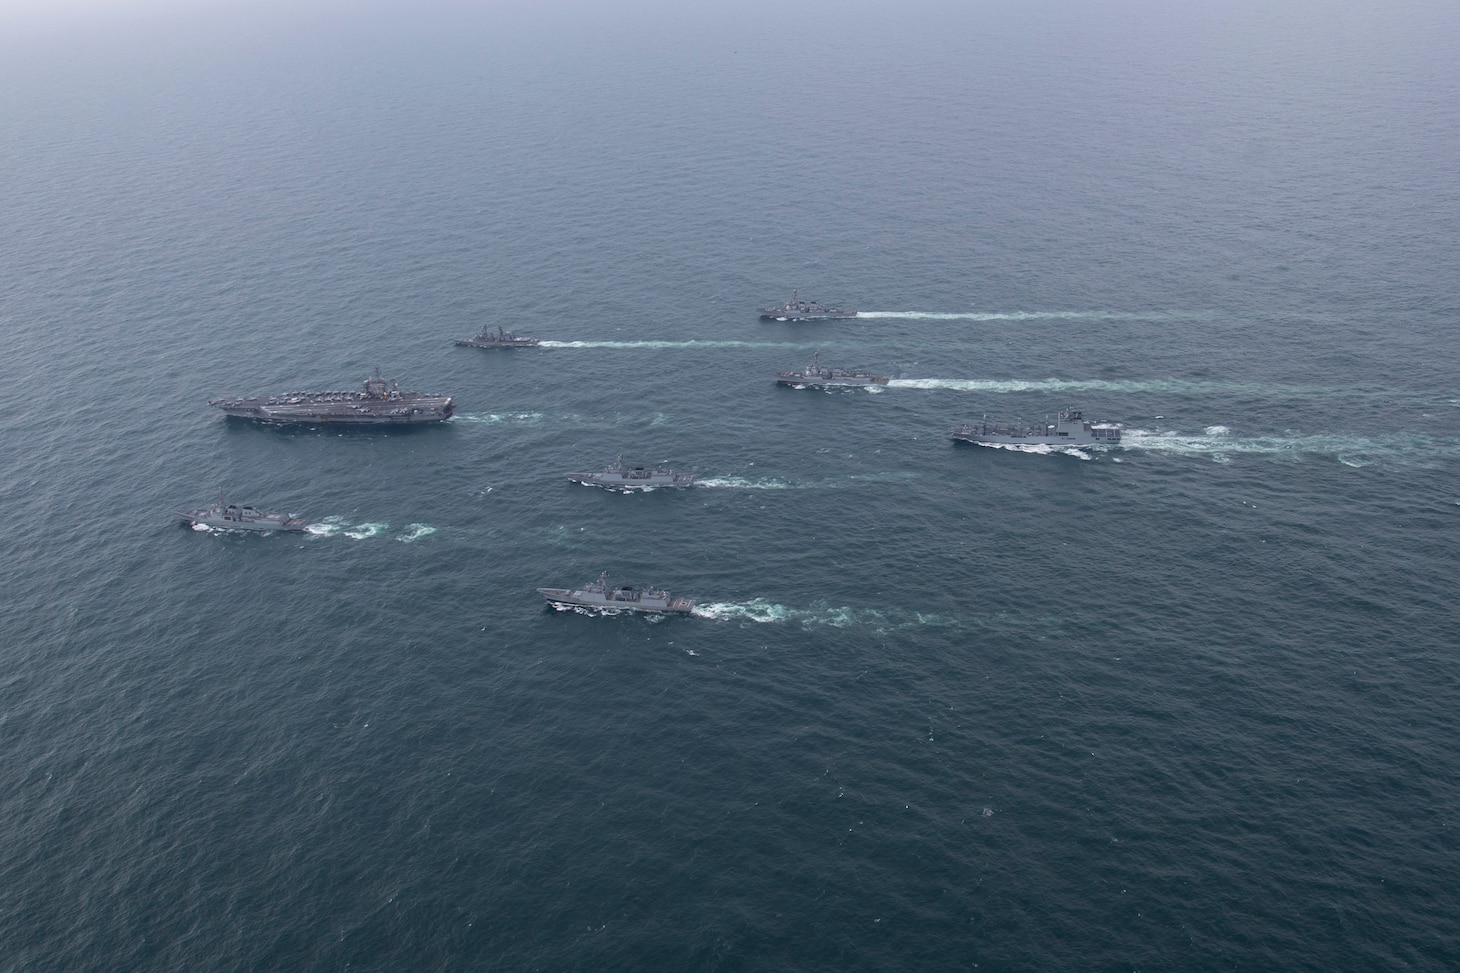 230404-N-KU796-1124 EAST CHINA SEA (April 4, 2023) The aircraft carrier USS Nimitz (CVN 68) steams in formation with the Japan Maritime Self-Defense Force (JMSDF) Asagiri-class destroyer JS Umigiri (DD 158), Republic of Korea (ROK) Sejong the Great-class destroyer ROKS Yul Gok Yi (DDG 992), Chungmugong Yi Sun-Shin-class destroyers ROKS Dae Jo young (DDH 977) and ROKS Choi Young (DDH 981), So Yang-class fast combat support ship ROKS So Yang (AOE 51), and the Arleigh Burke-class guided-missile destroyers USS Decatur (DDG 73) and USS Wayne E. Meyer (DDG 108). The Nimitz Carrier Strike Group is conducting a trilateral maritime exercise with the ROK Navy and JMSDF in the U.S. 7th Fleet area of operations. 7th Fleet is the U.S. Navy's largest forward-deployed numbered fleet, and routinely interacts and operates with allies and partners in preserving a free and open Indo-Pacific region. (U.S. Navy photo by Mass Communication Specialist 2nd Class Samuel Osborn)